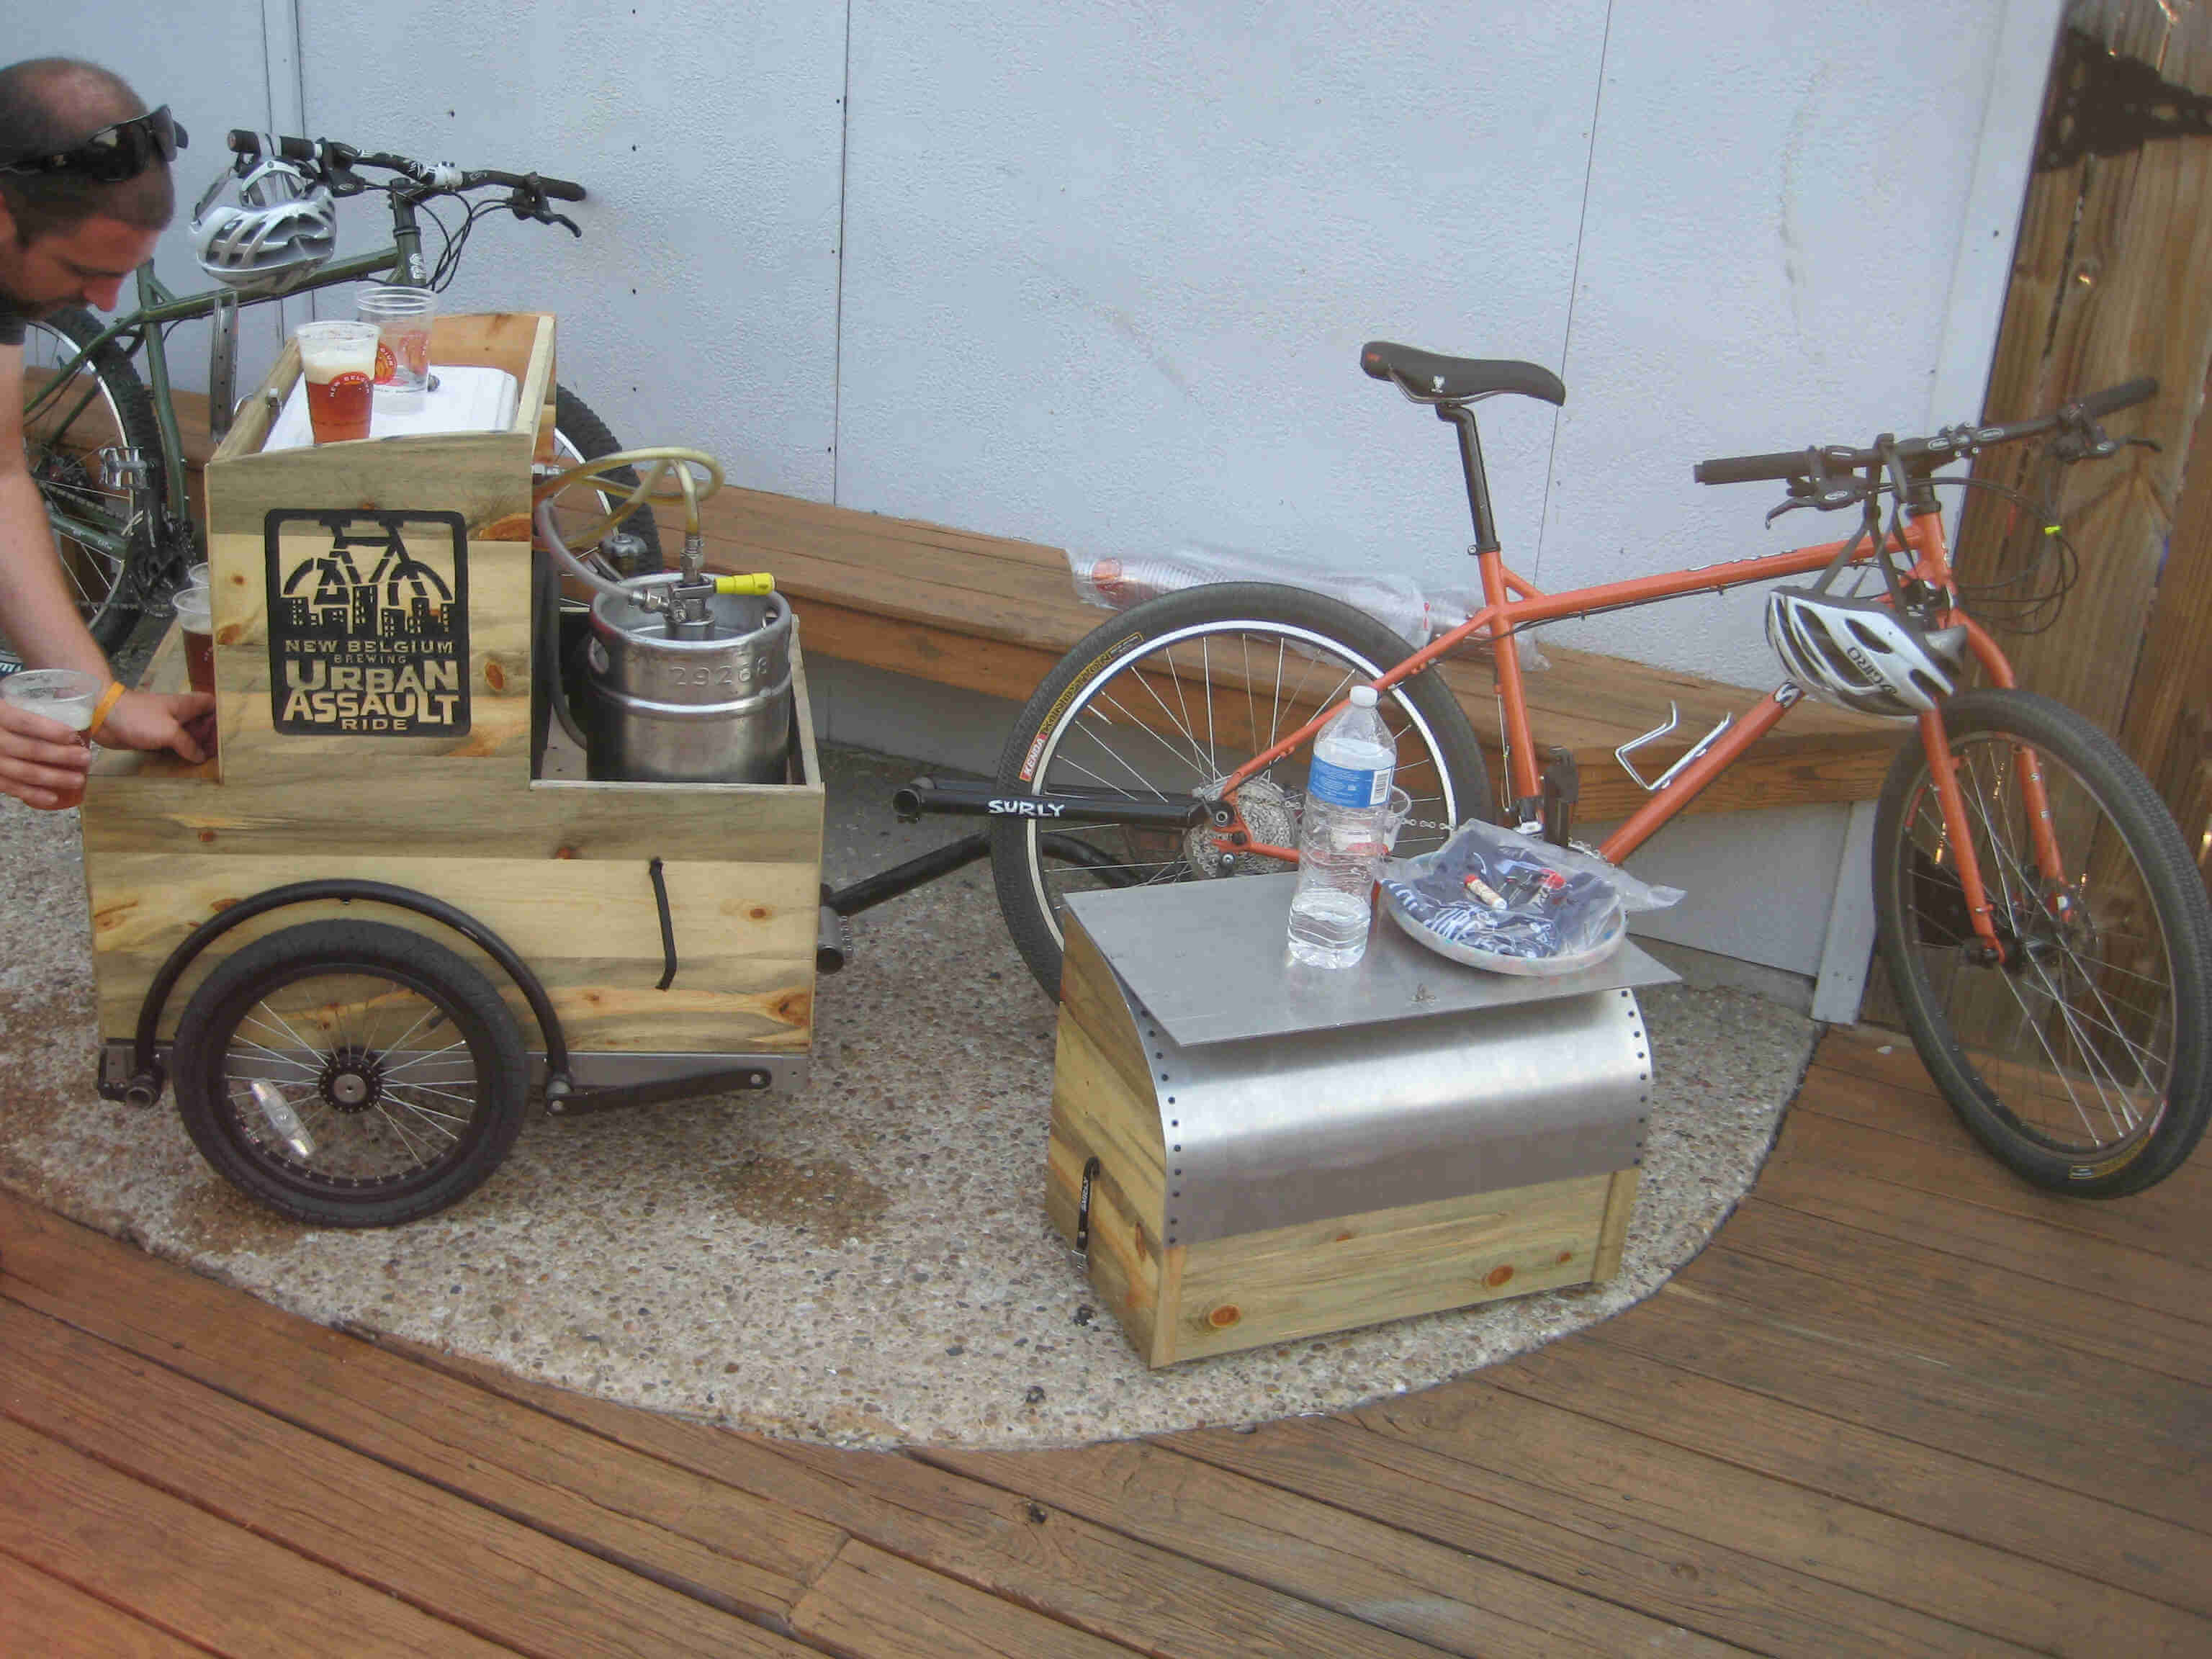 Right side view of an orange Surly bike & trailer with keg inside, on an outside deck, with a person behind the trailer